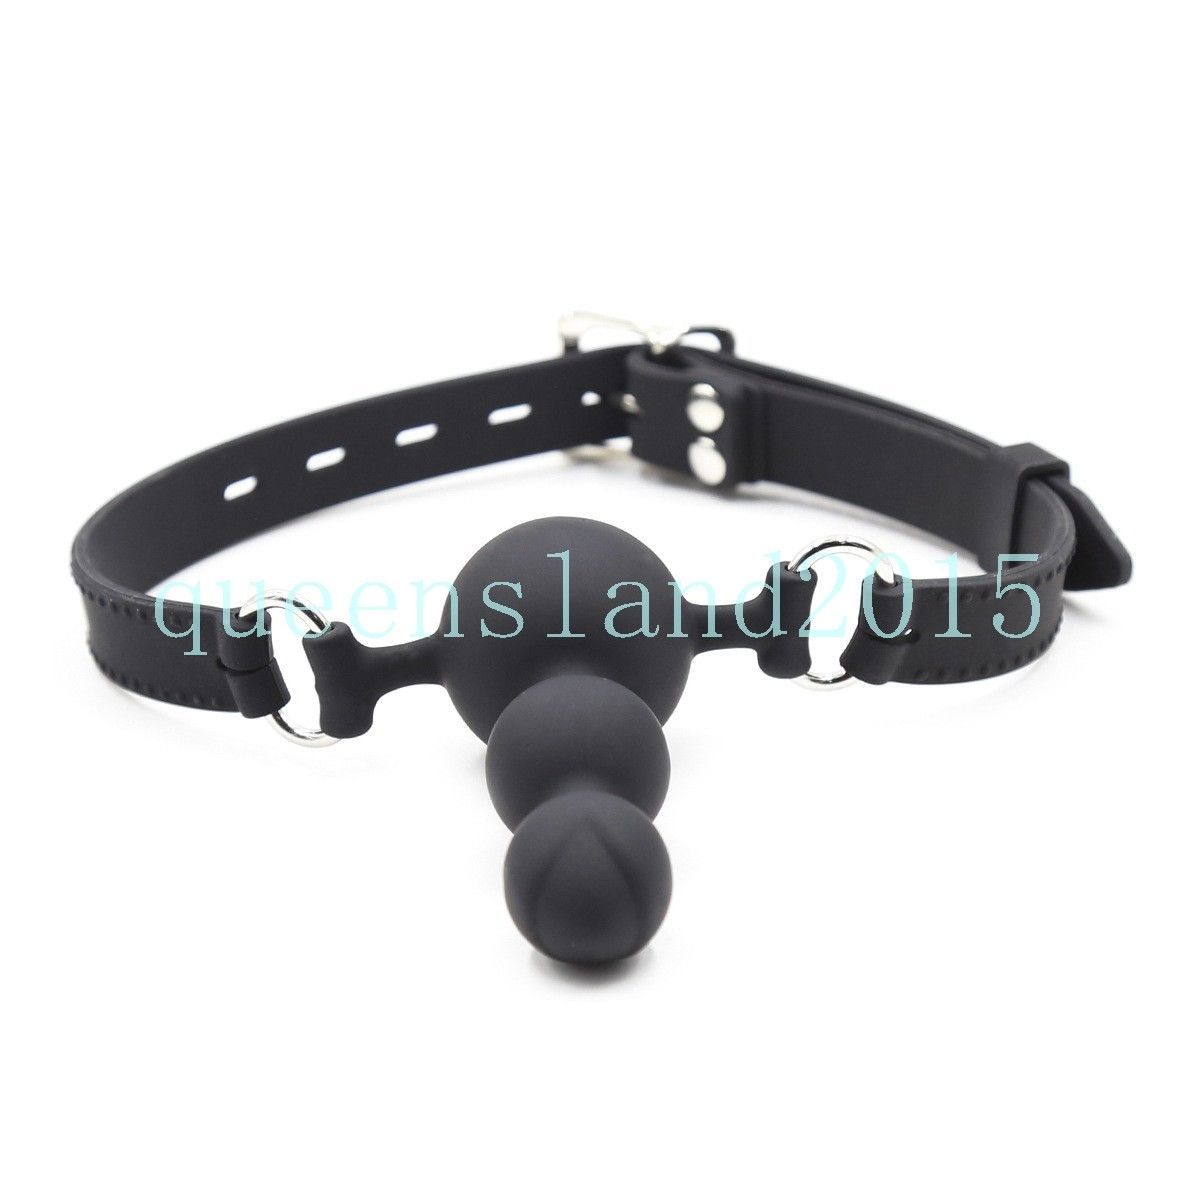 Bondage Body Safe Silicone Mouth Gag Bead Adjustable Leather Belt Strap  Couple Game Fun #R45 From Zgmtai, $7.12